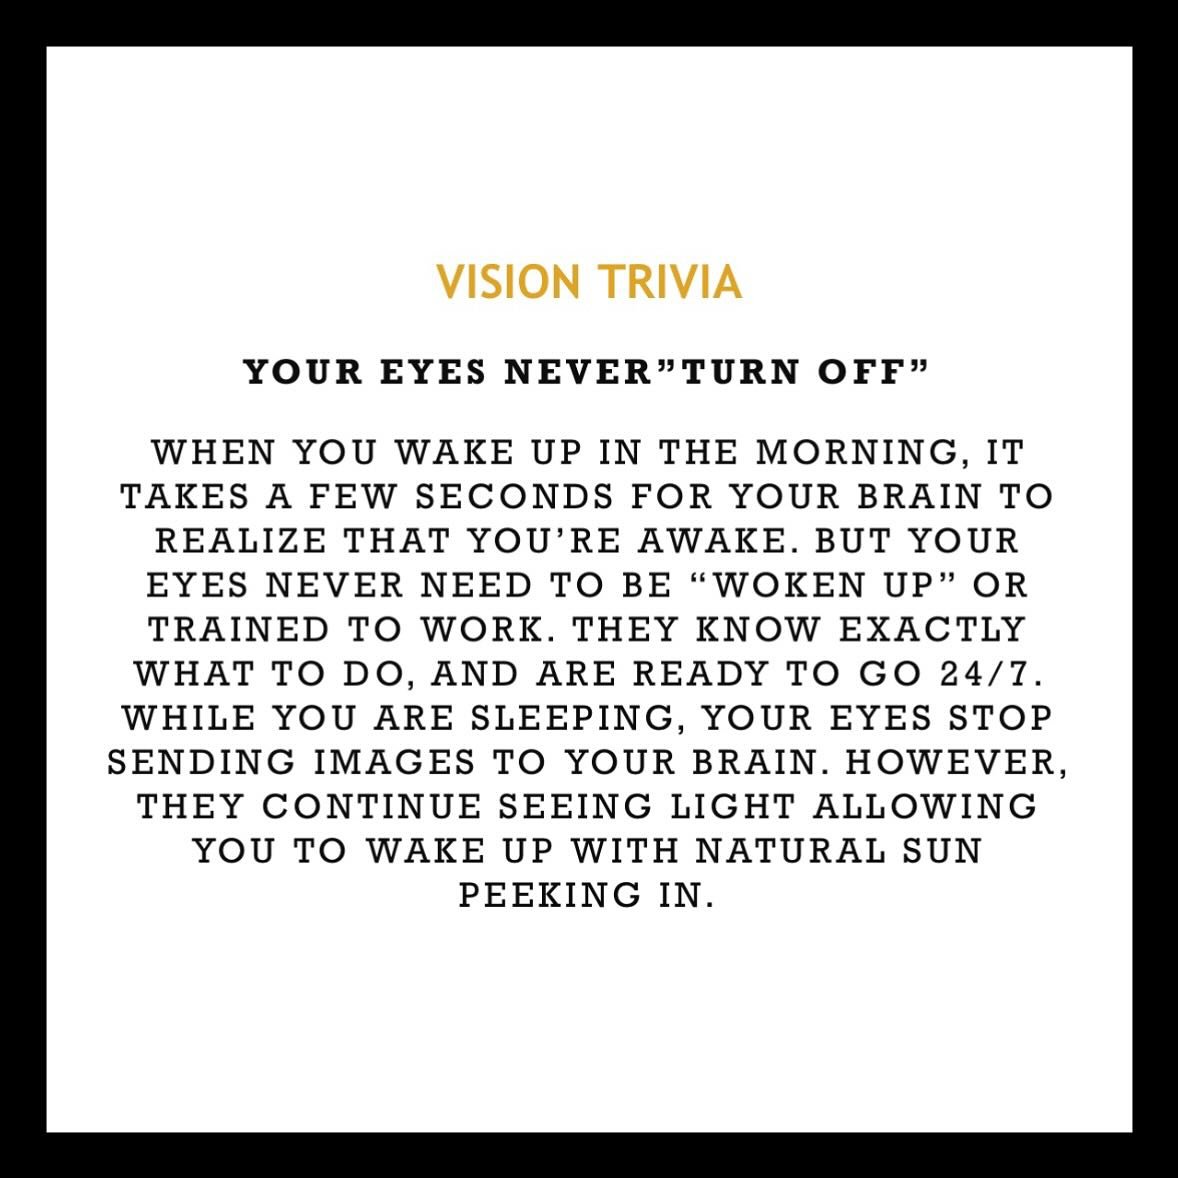 Ever wondered why you wake up to bright light in your room?! Well, your eyes never truly go to sleep! 👀☀️😴 #funfactfriday #visiontrivia #themoreyouknow #eyefunfacts #eyes #eyeglasses #glasses #sunglasses #eyeexam #eyedoctor #optometrist #optometry 